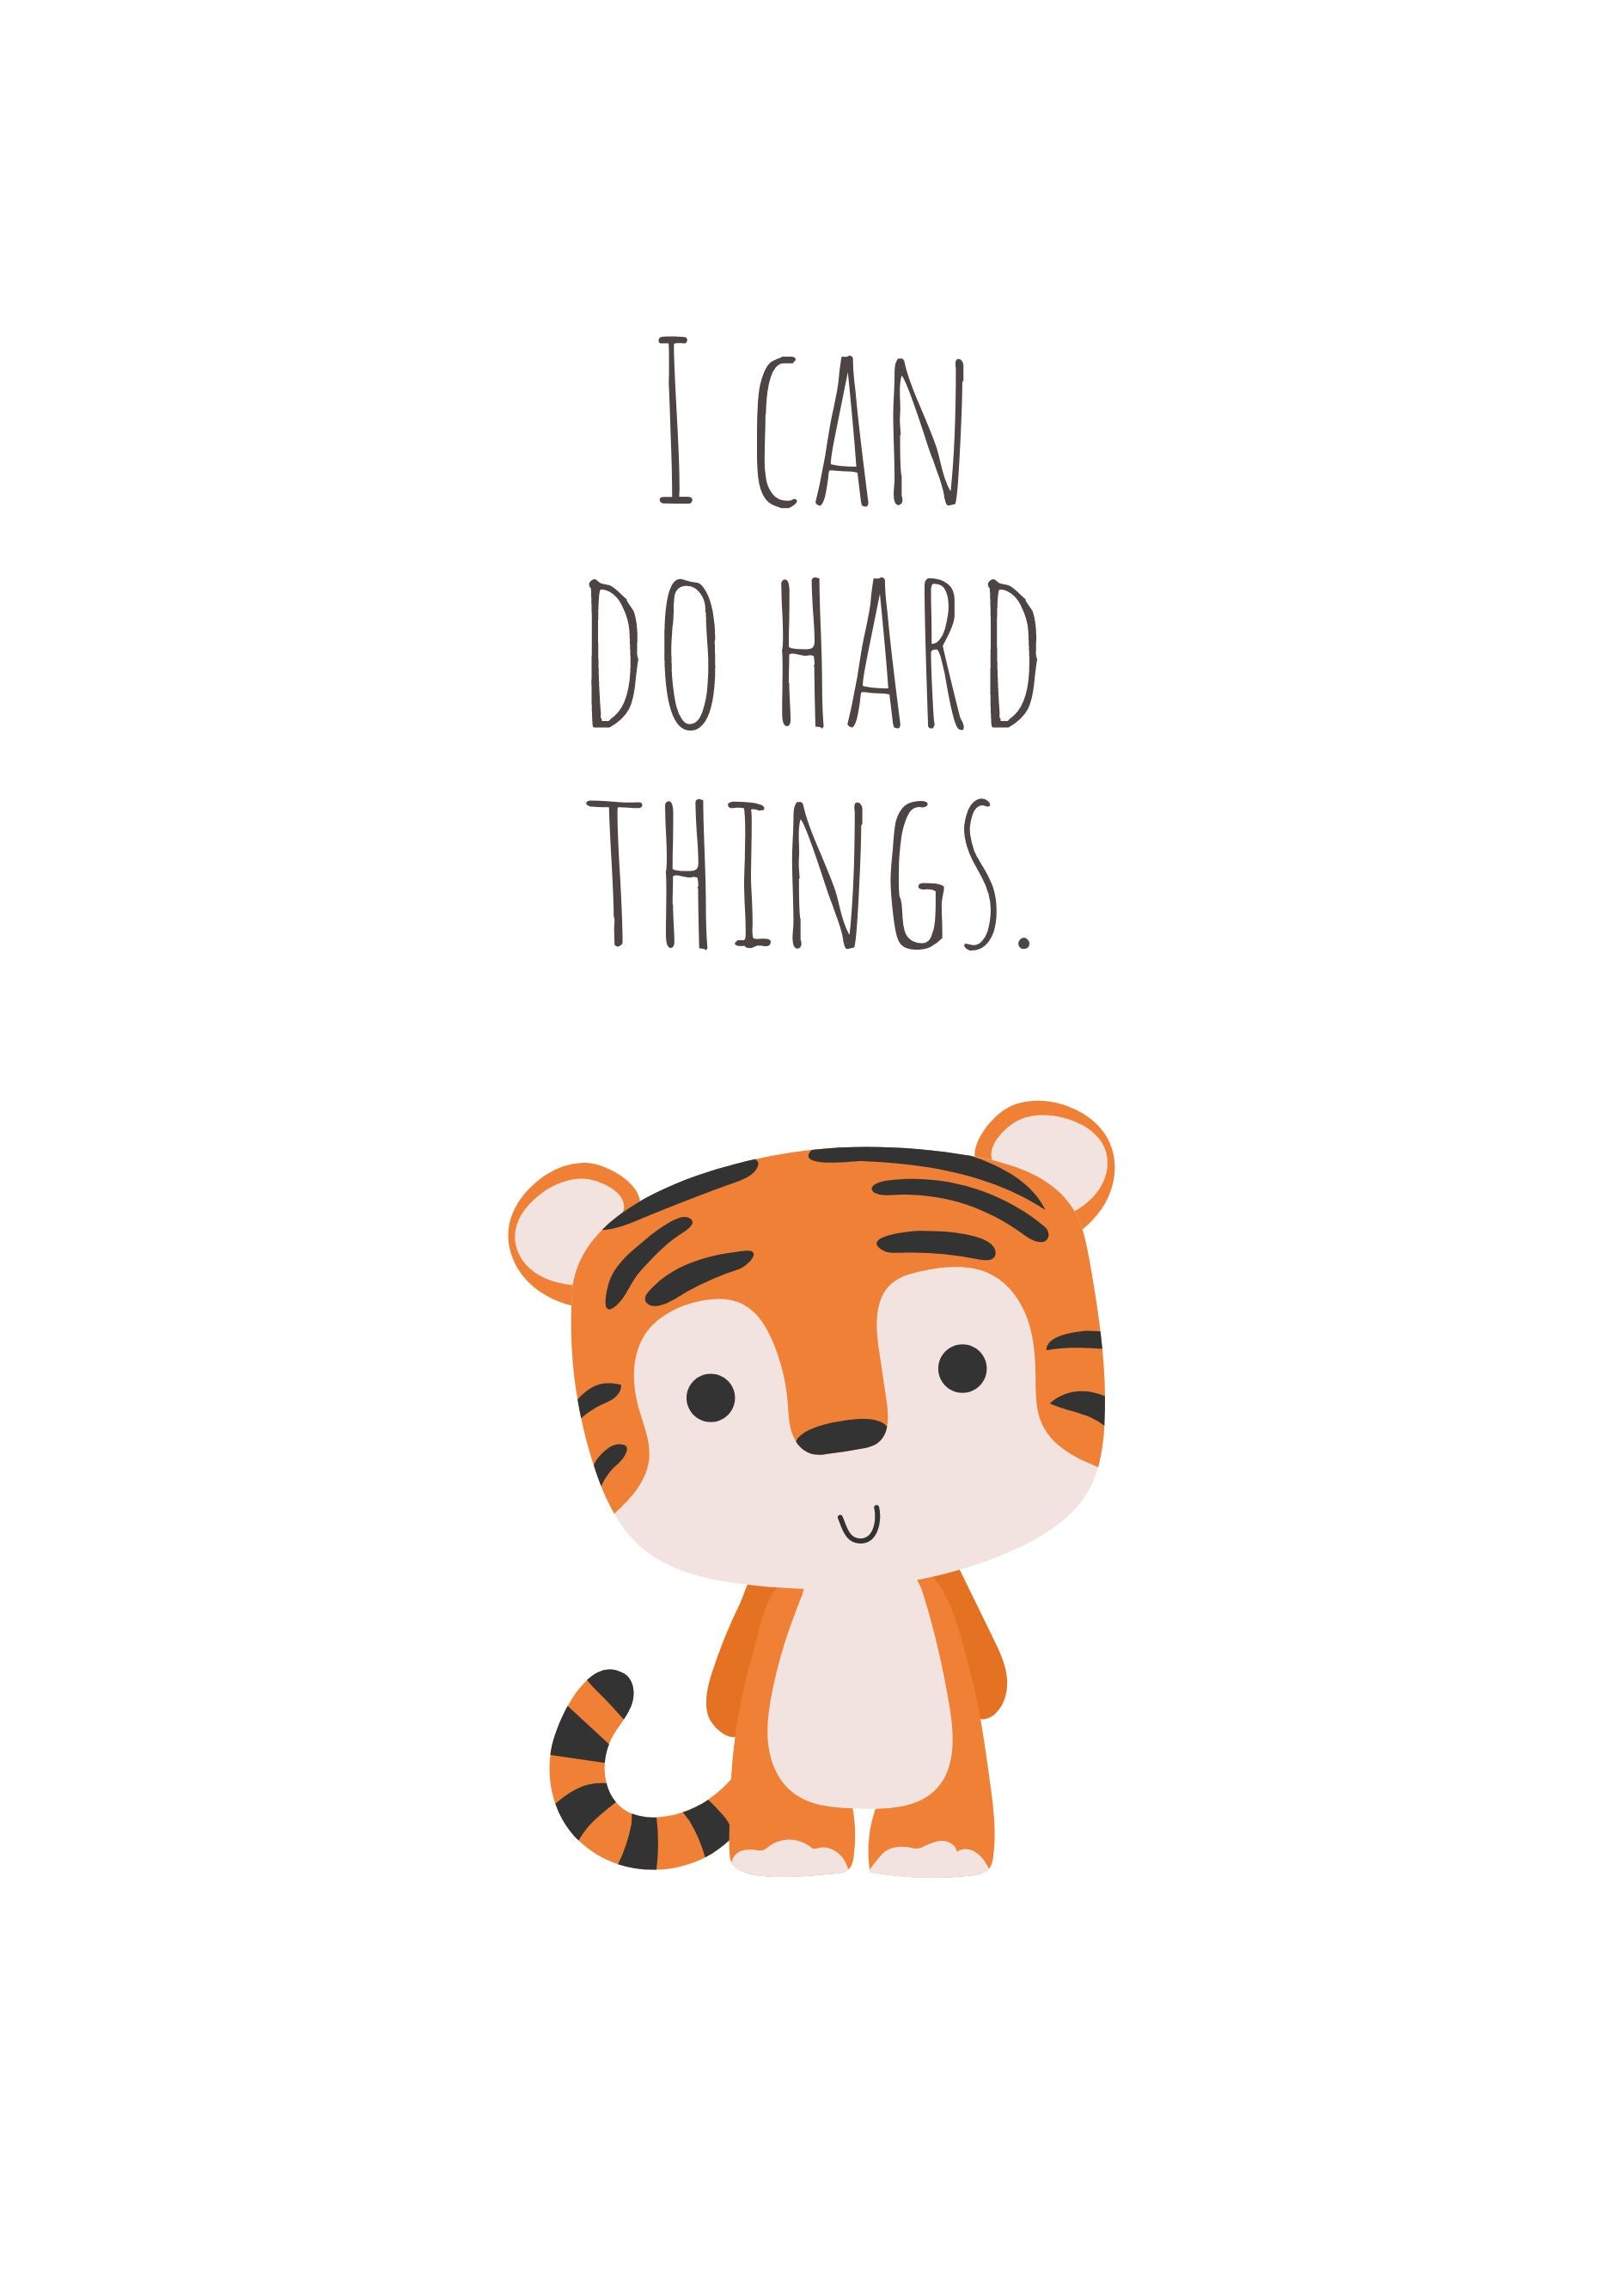 I can do hard things. barnposter